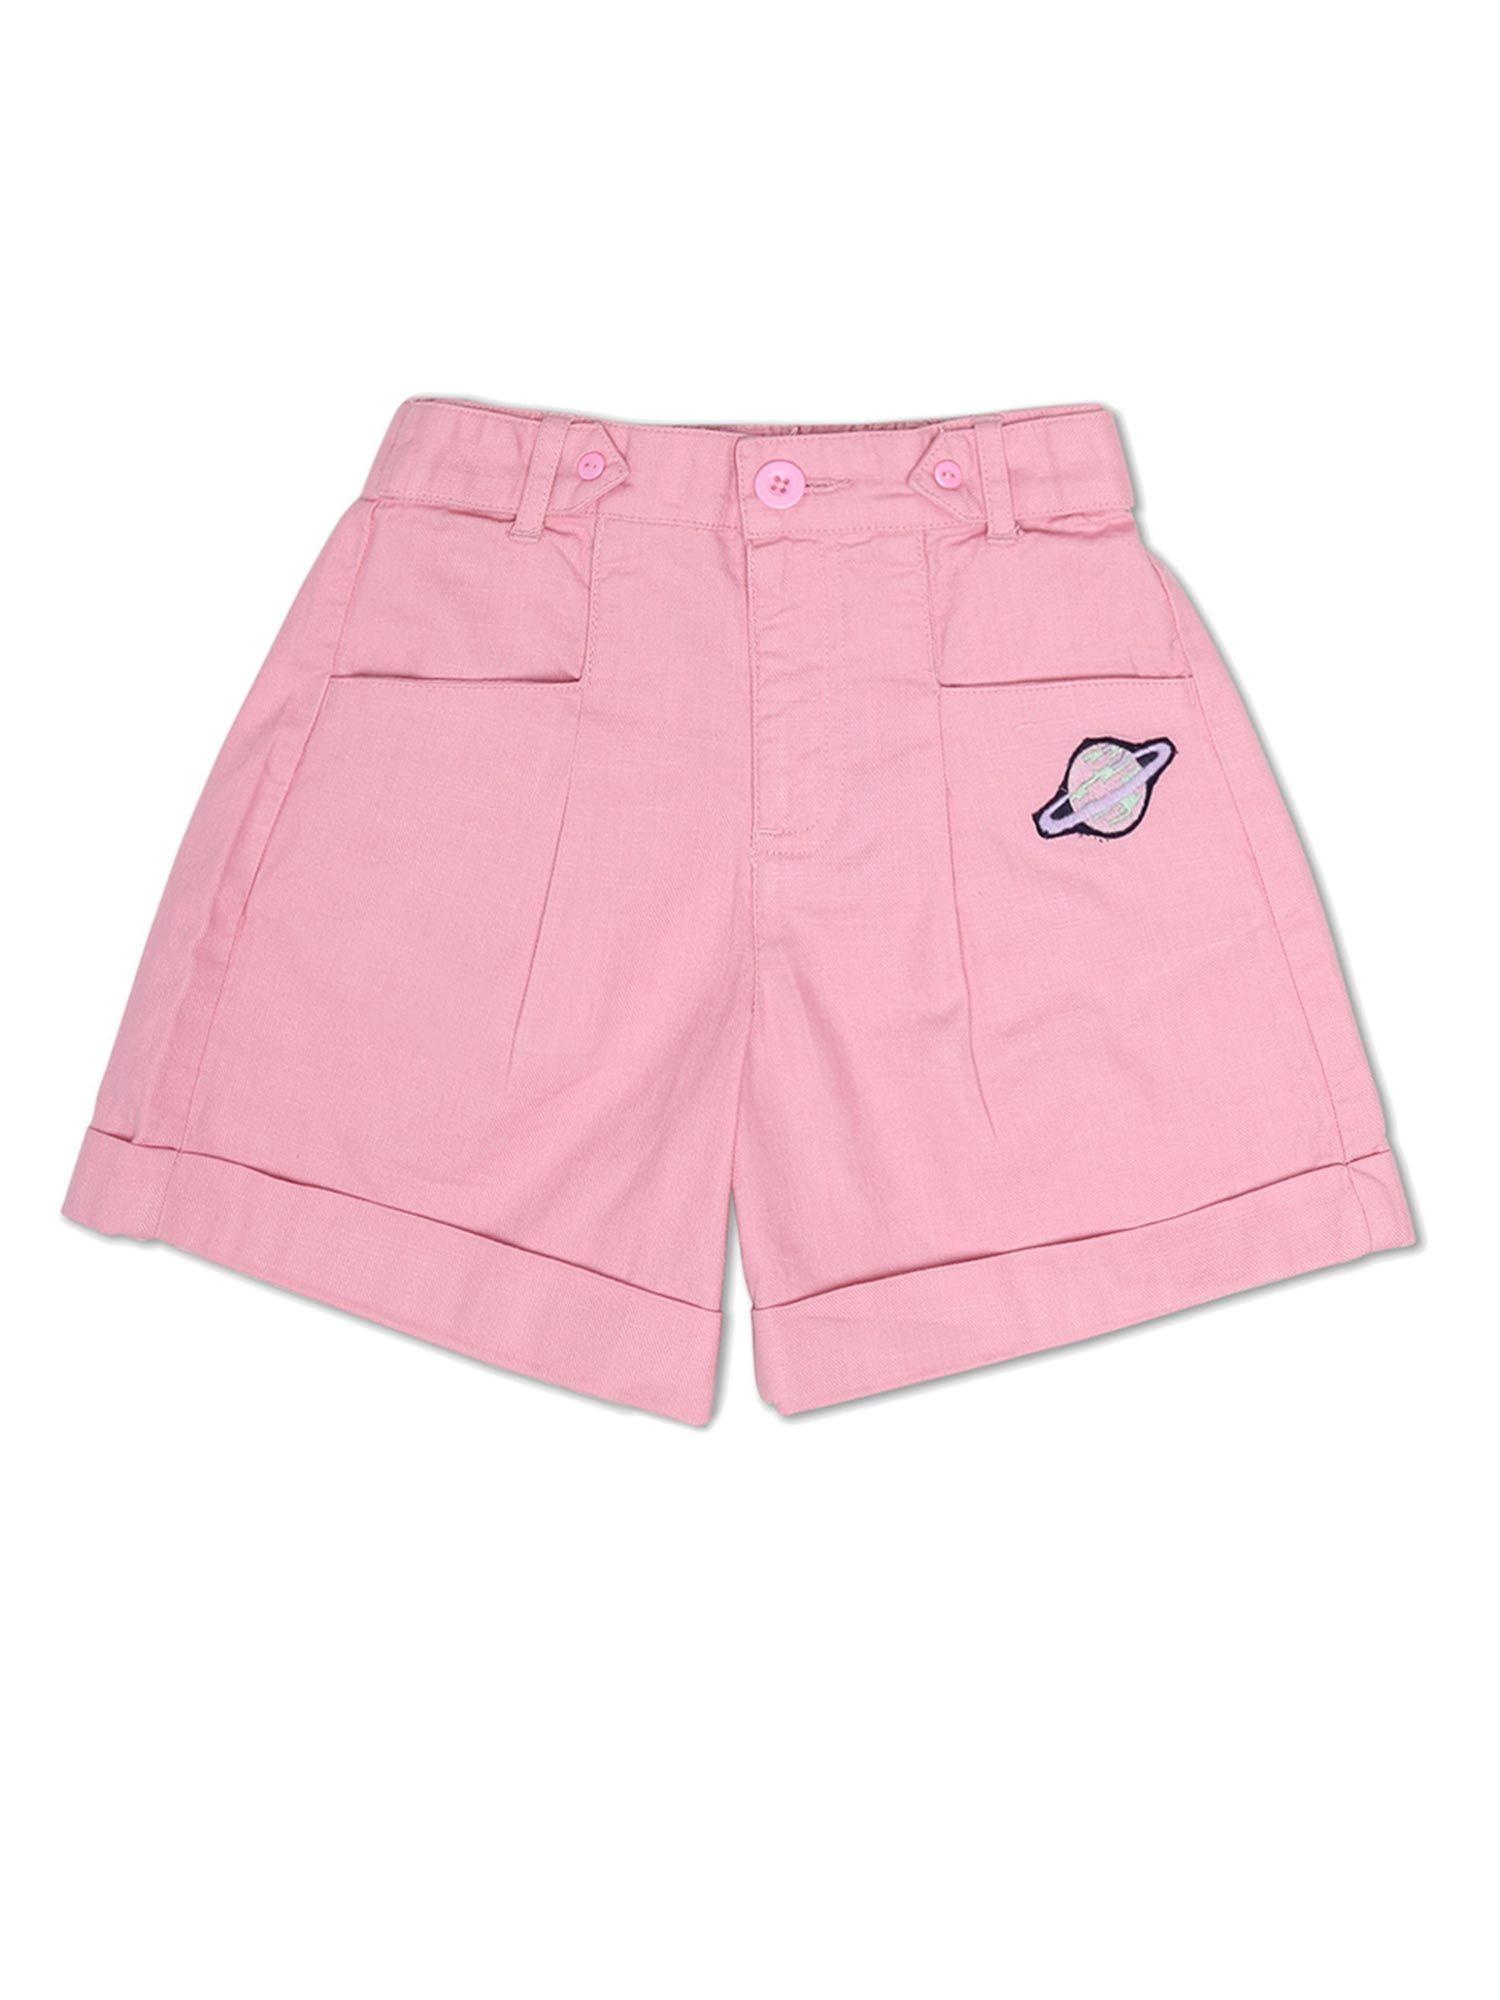 girls pink solid shorts